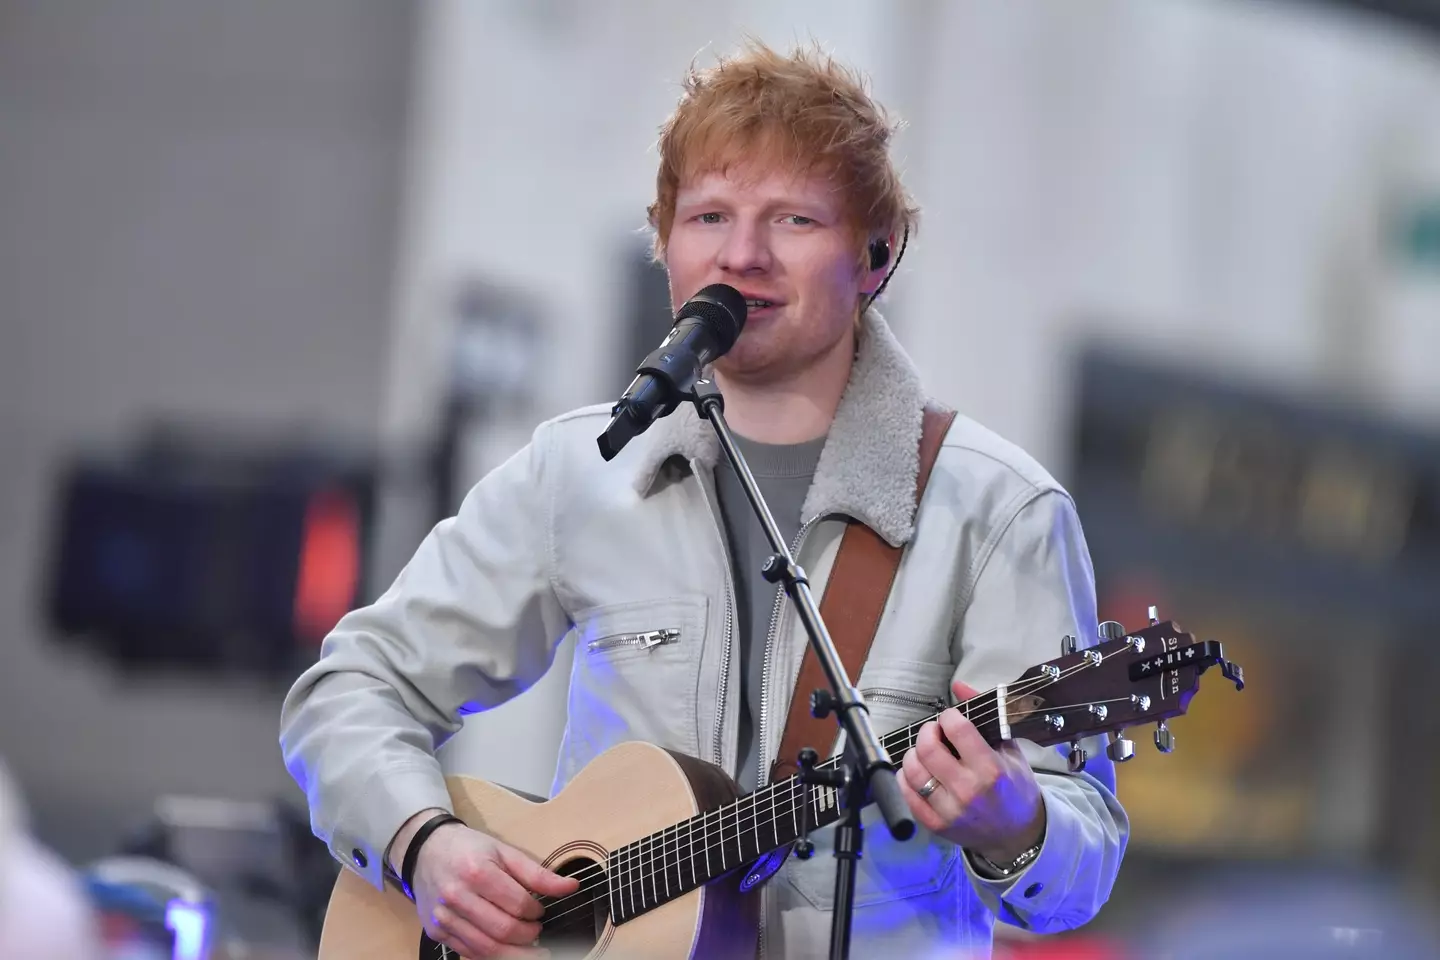 Ed Sheeran has been doling out advice to Capaldi.